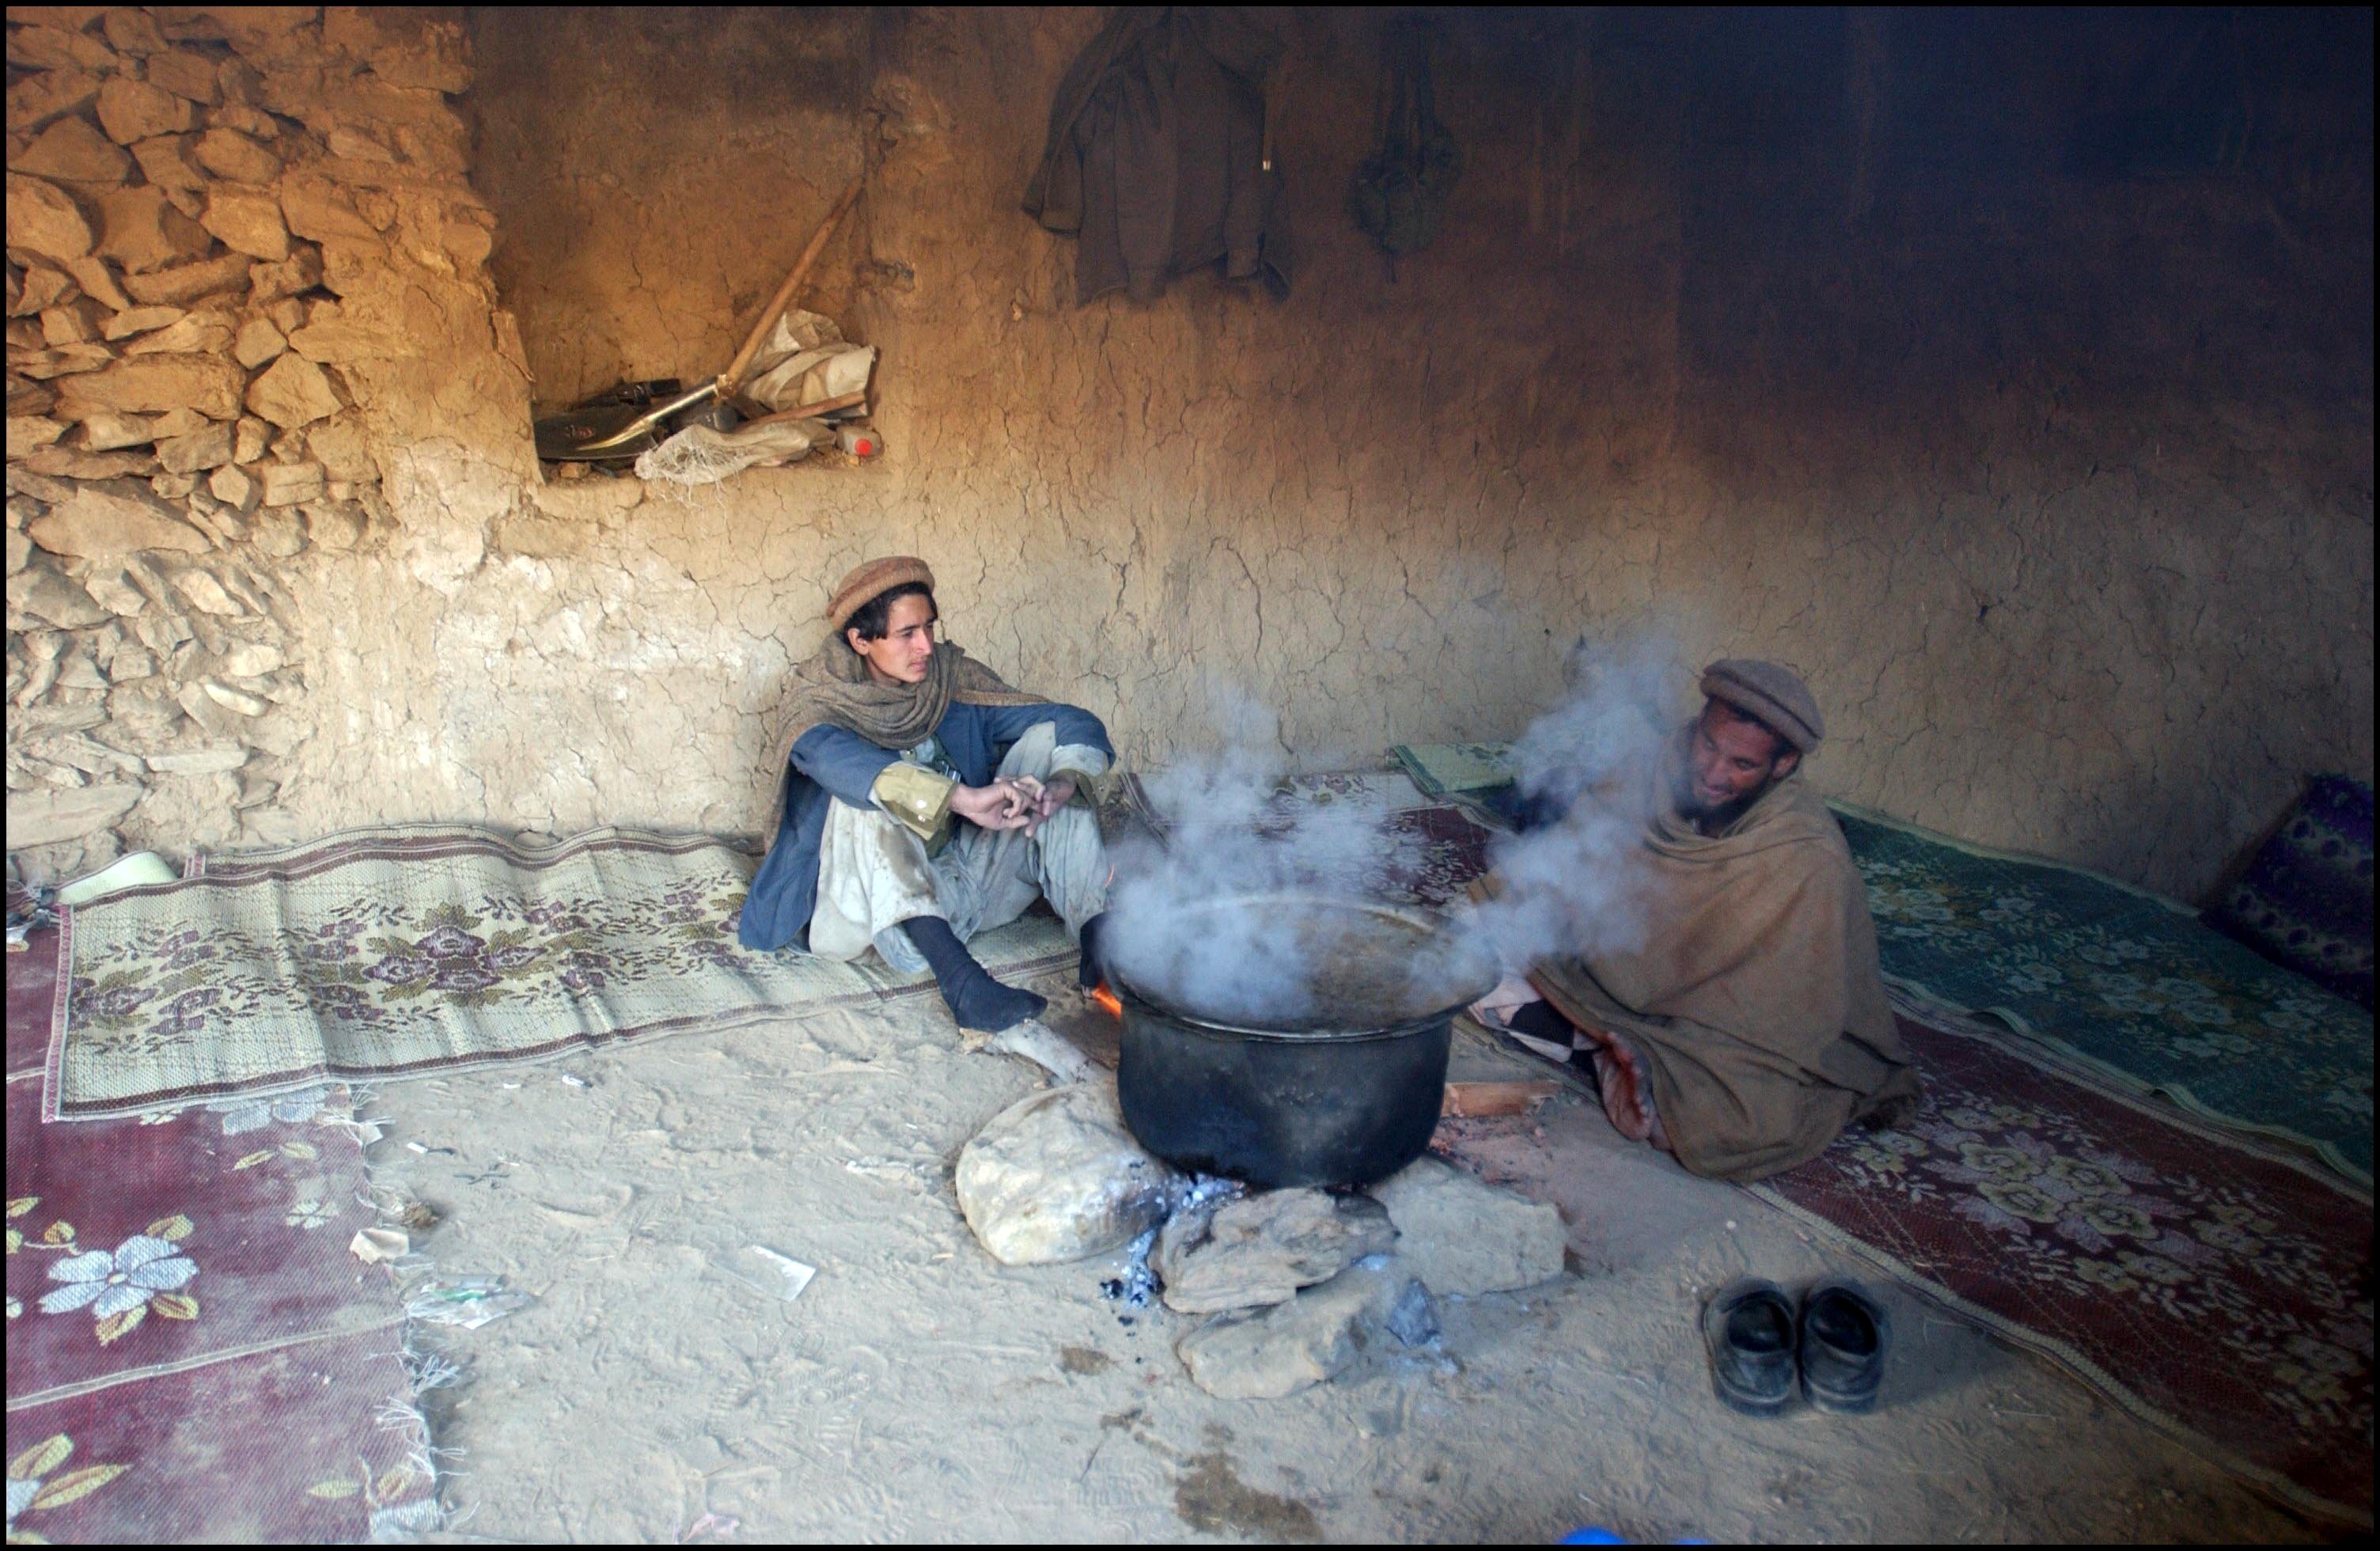 Eastern Alliance Moudjahidin Fighters Prepare A Meal Inside A Captured Cave, Which Supposedly Belonged To Al Qaeda Leader Osama Bin Laden, In The Mountains Of Tora Bora In Eastern Afghanistan On December 13Th, 2001 In Tora Bora, Afghanistan.